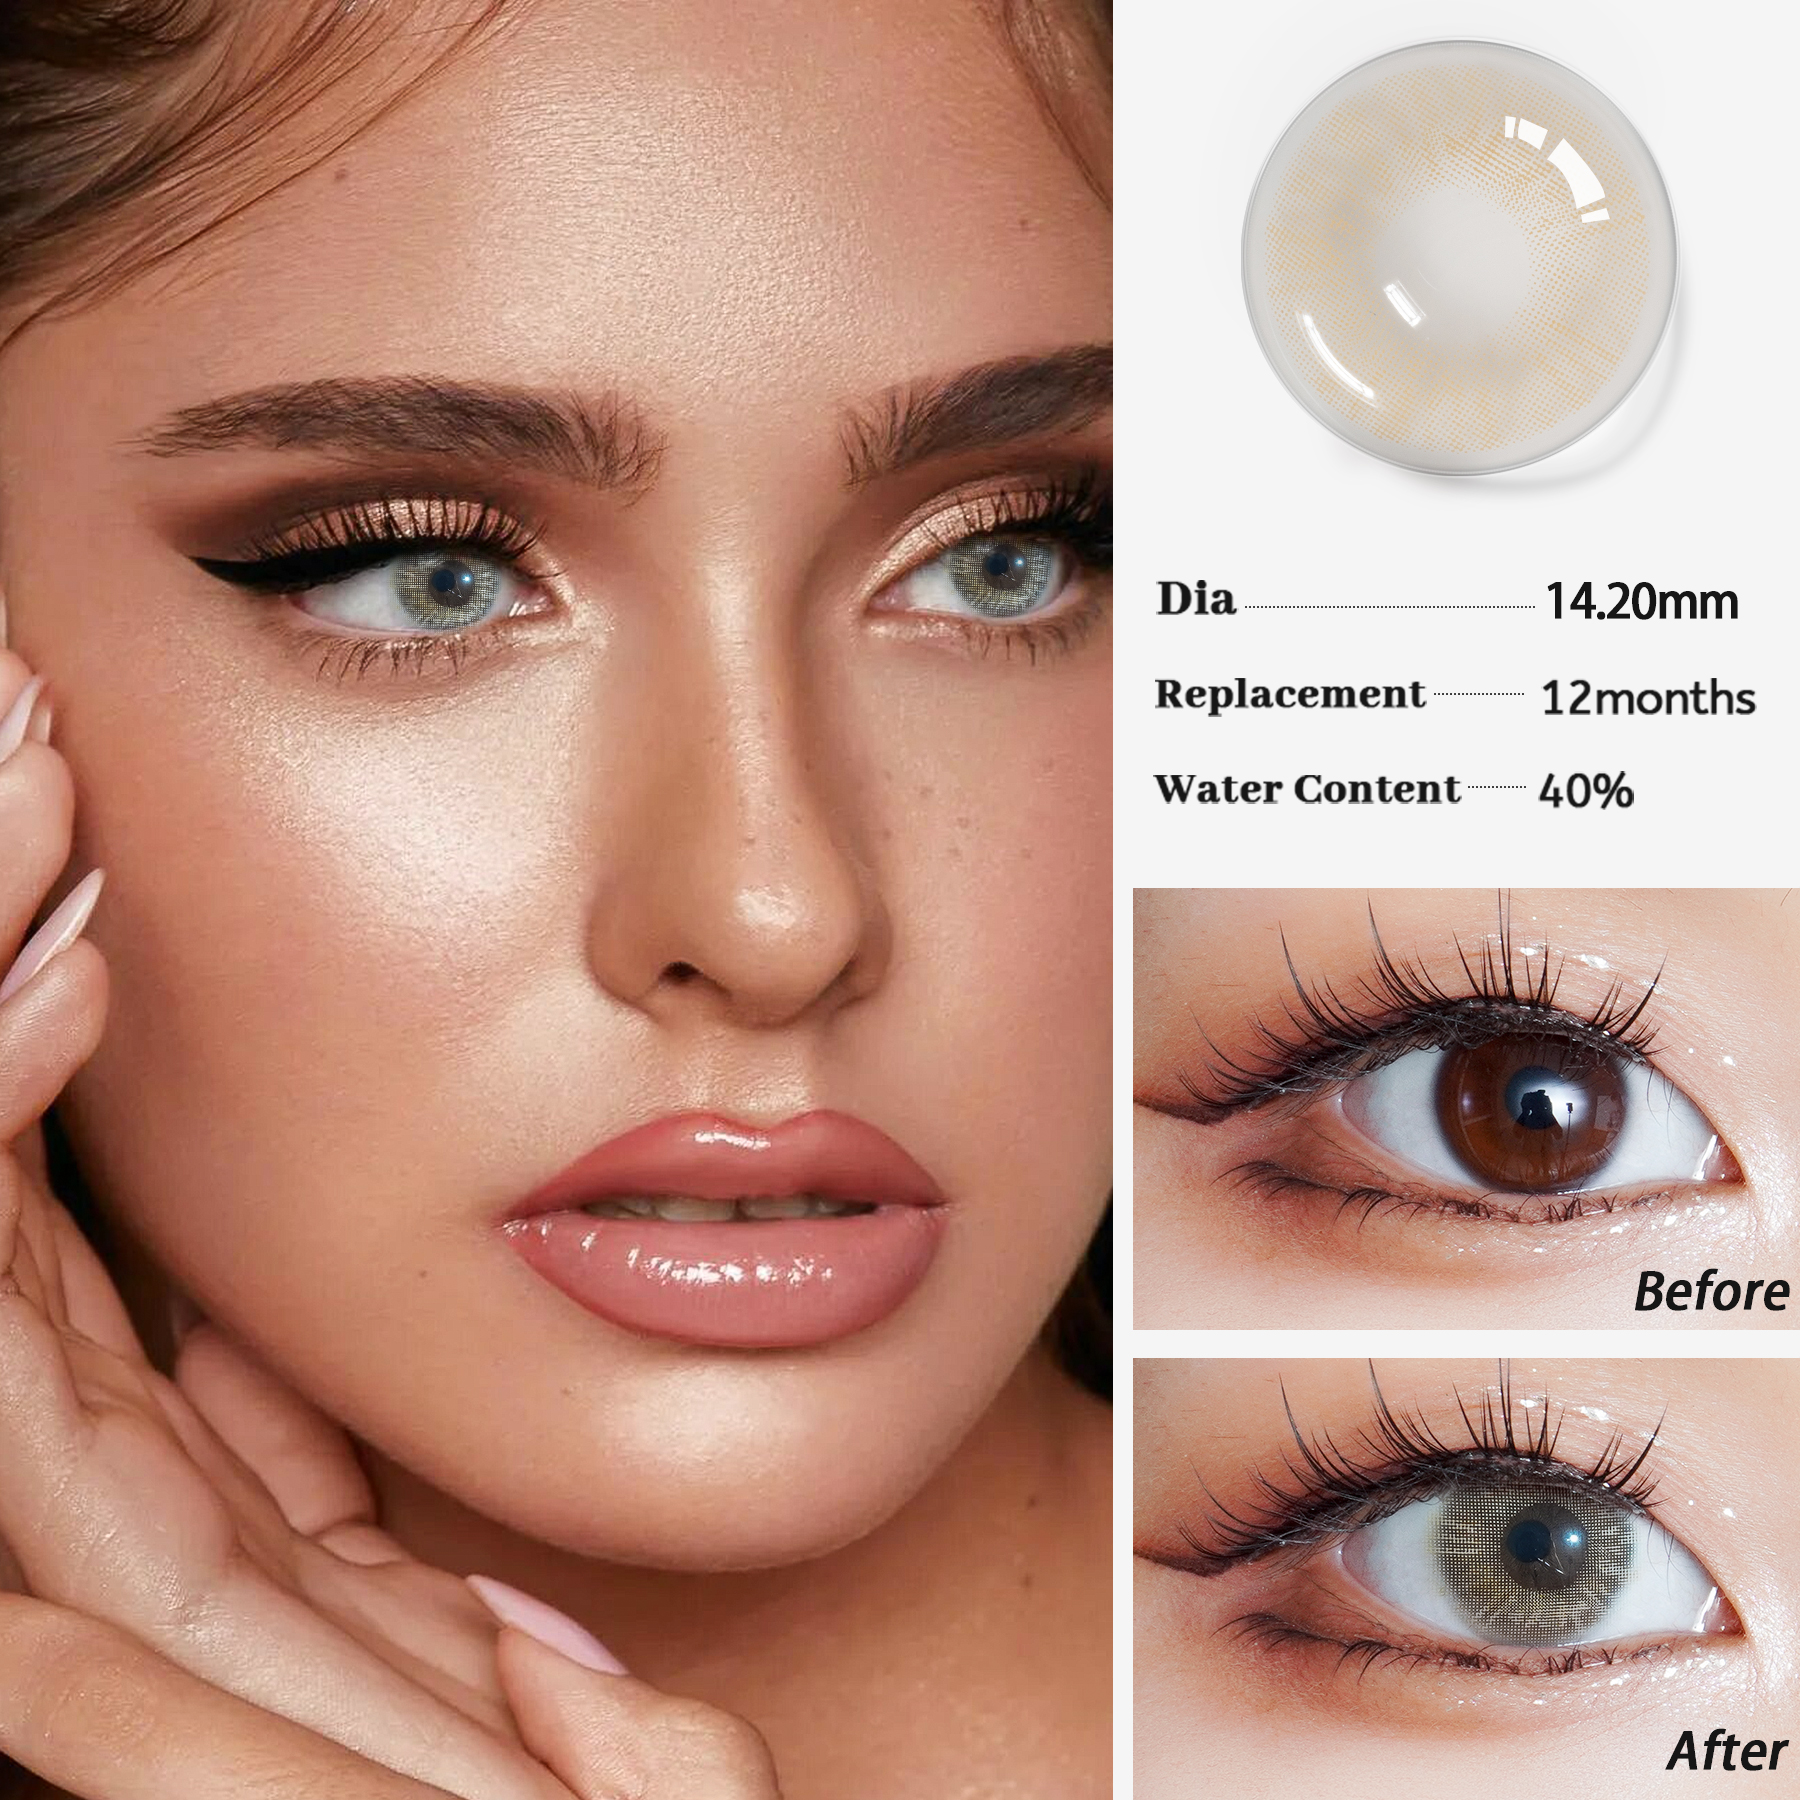 Most Popular New Colors Cosmetic Eye CHERRY Contact Lenses Wholesale Yearly Prescription From Plano to 800 fast